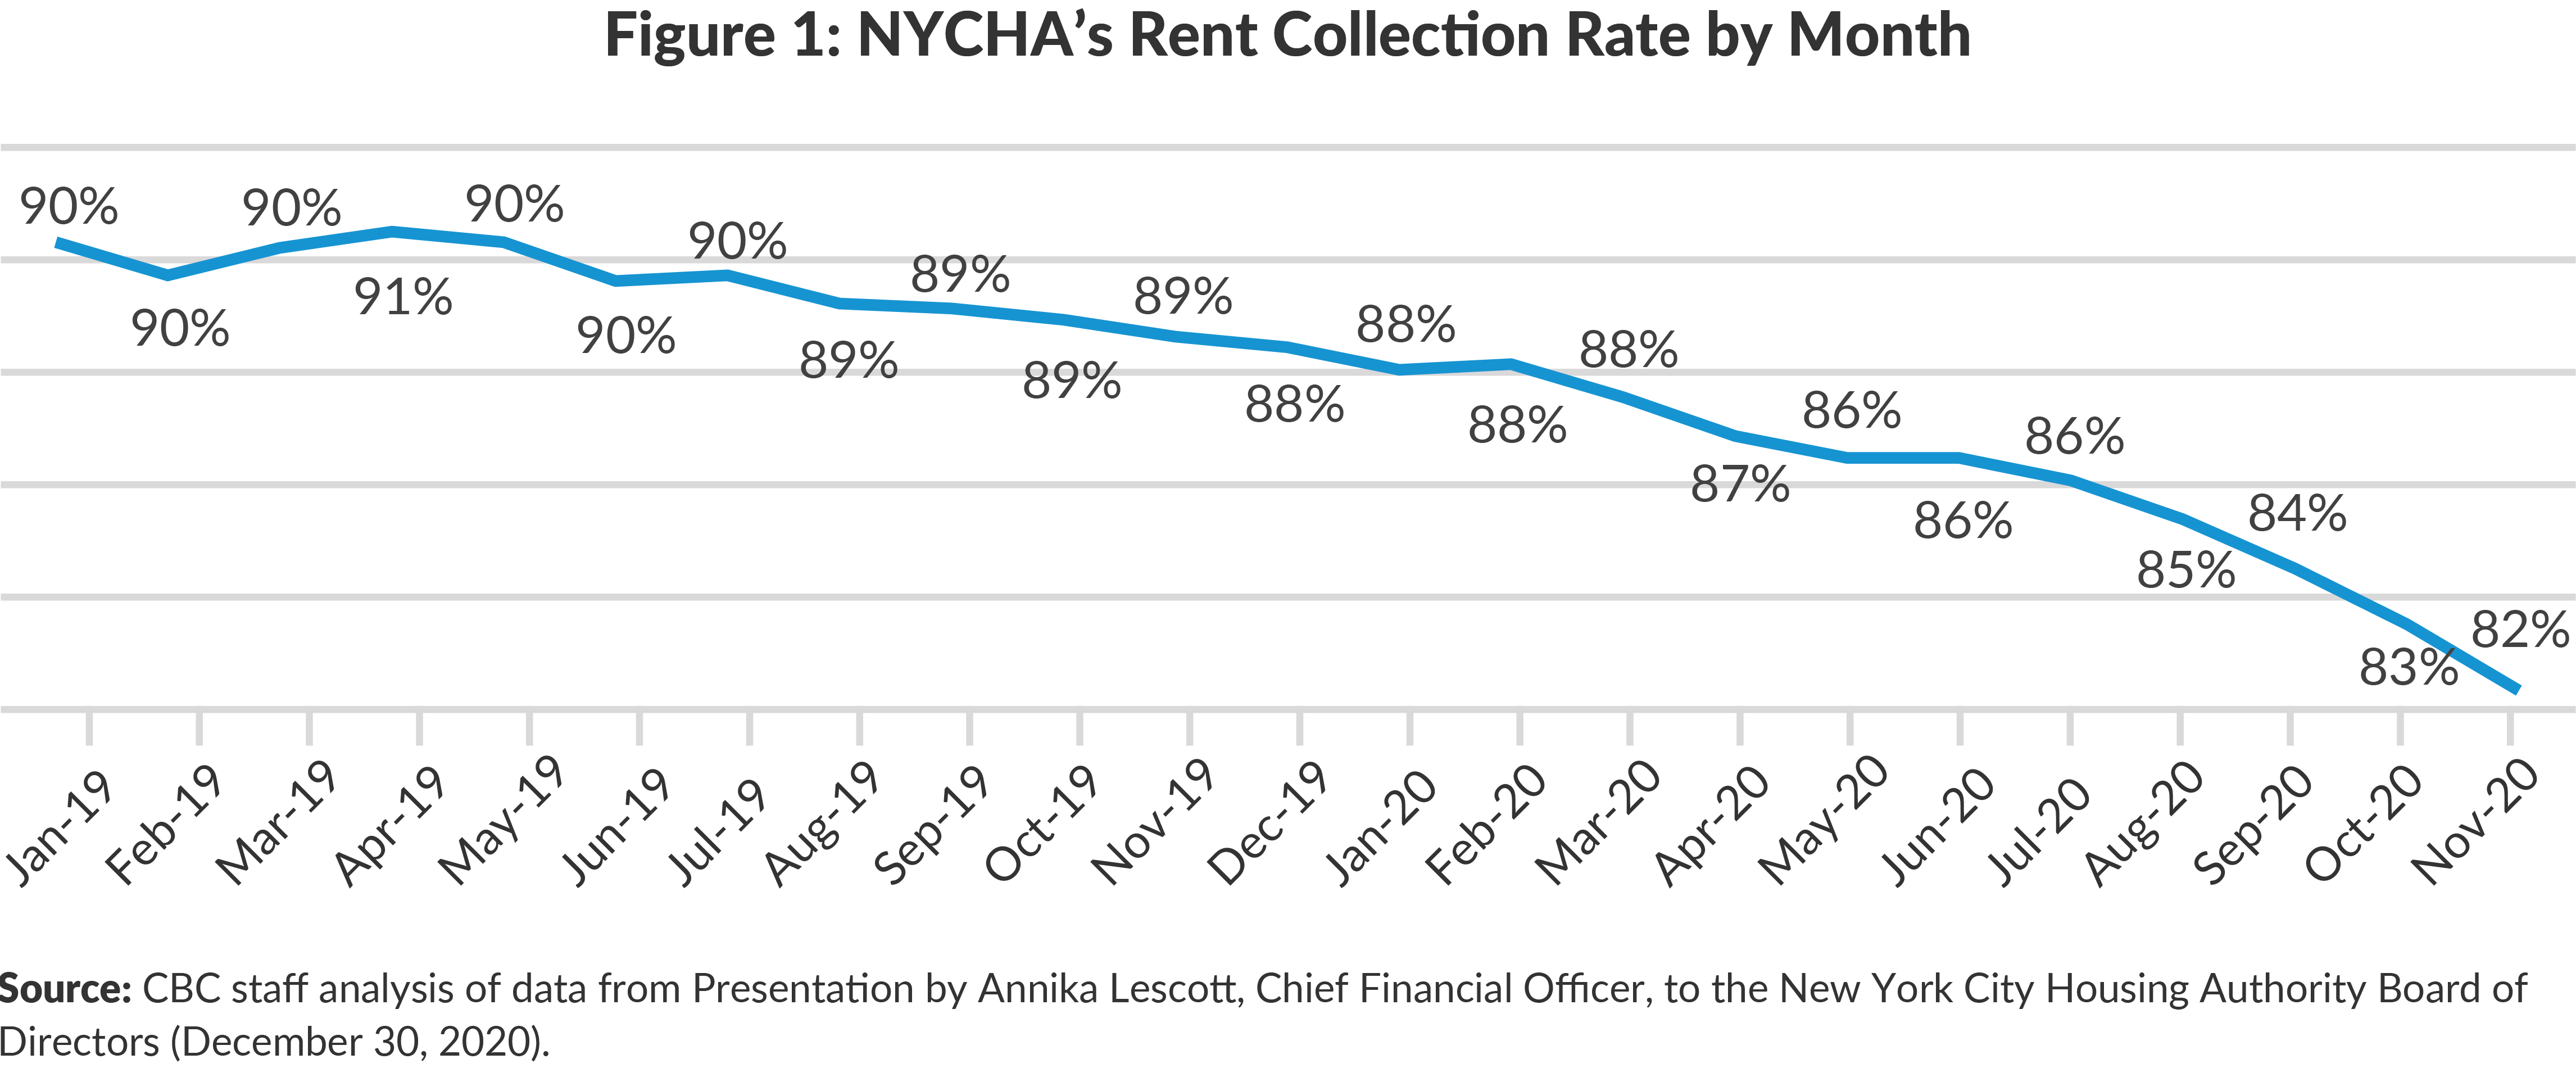 Figure 1. NYCHA’s Rent Collection Rate by Month